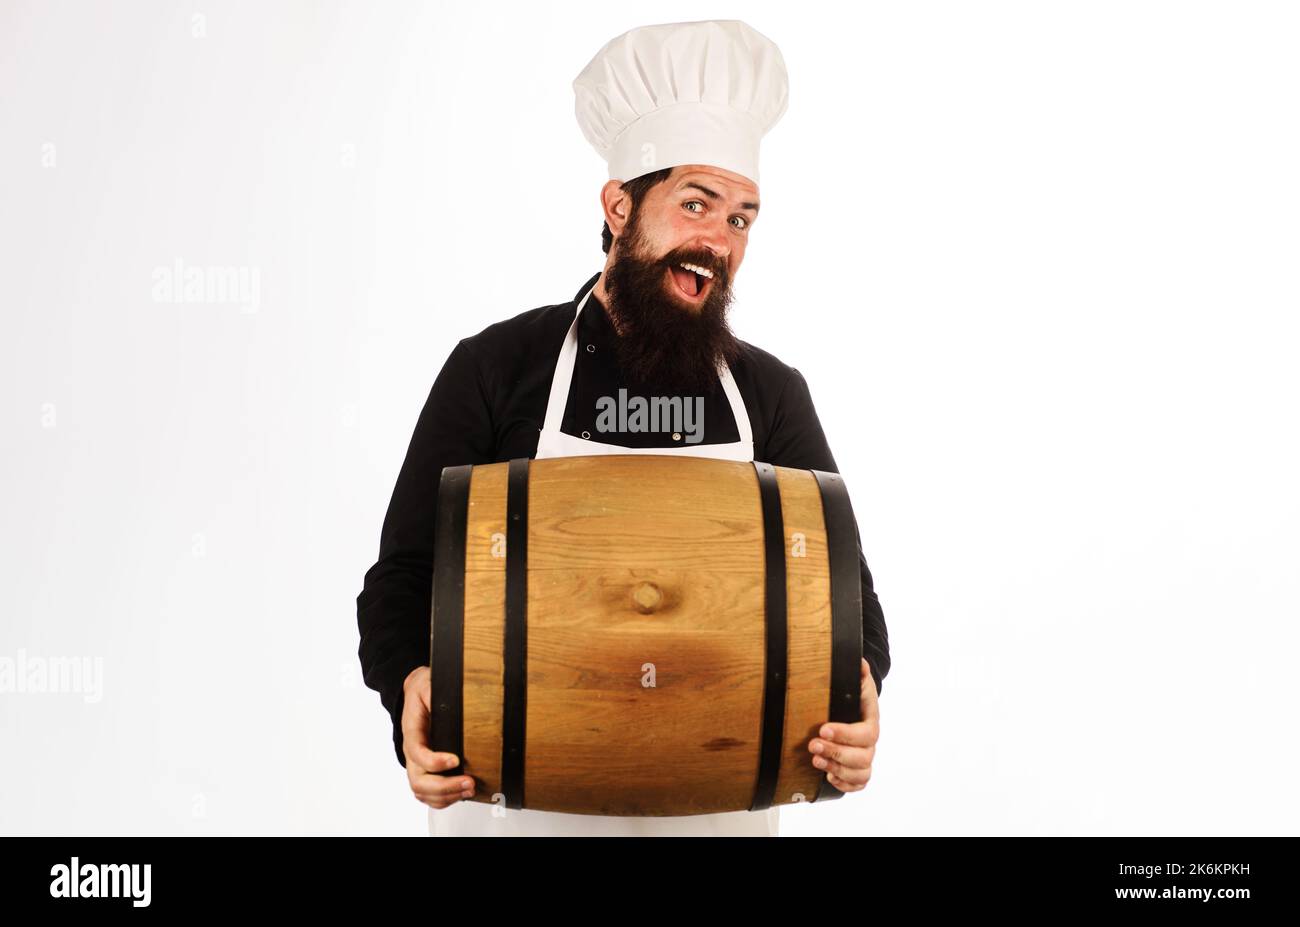 Brewer in brewery with wood barrel. Oktoberfest. Bearded man in chef hat and apron with cask wine. Stock Photo